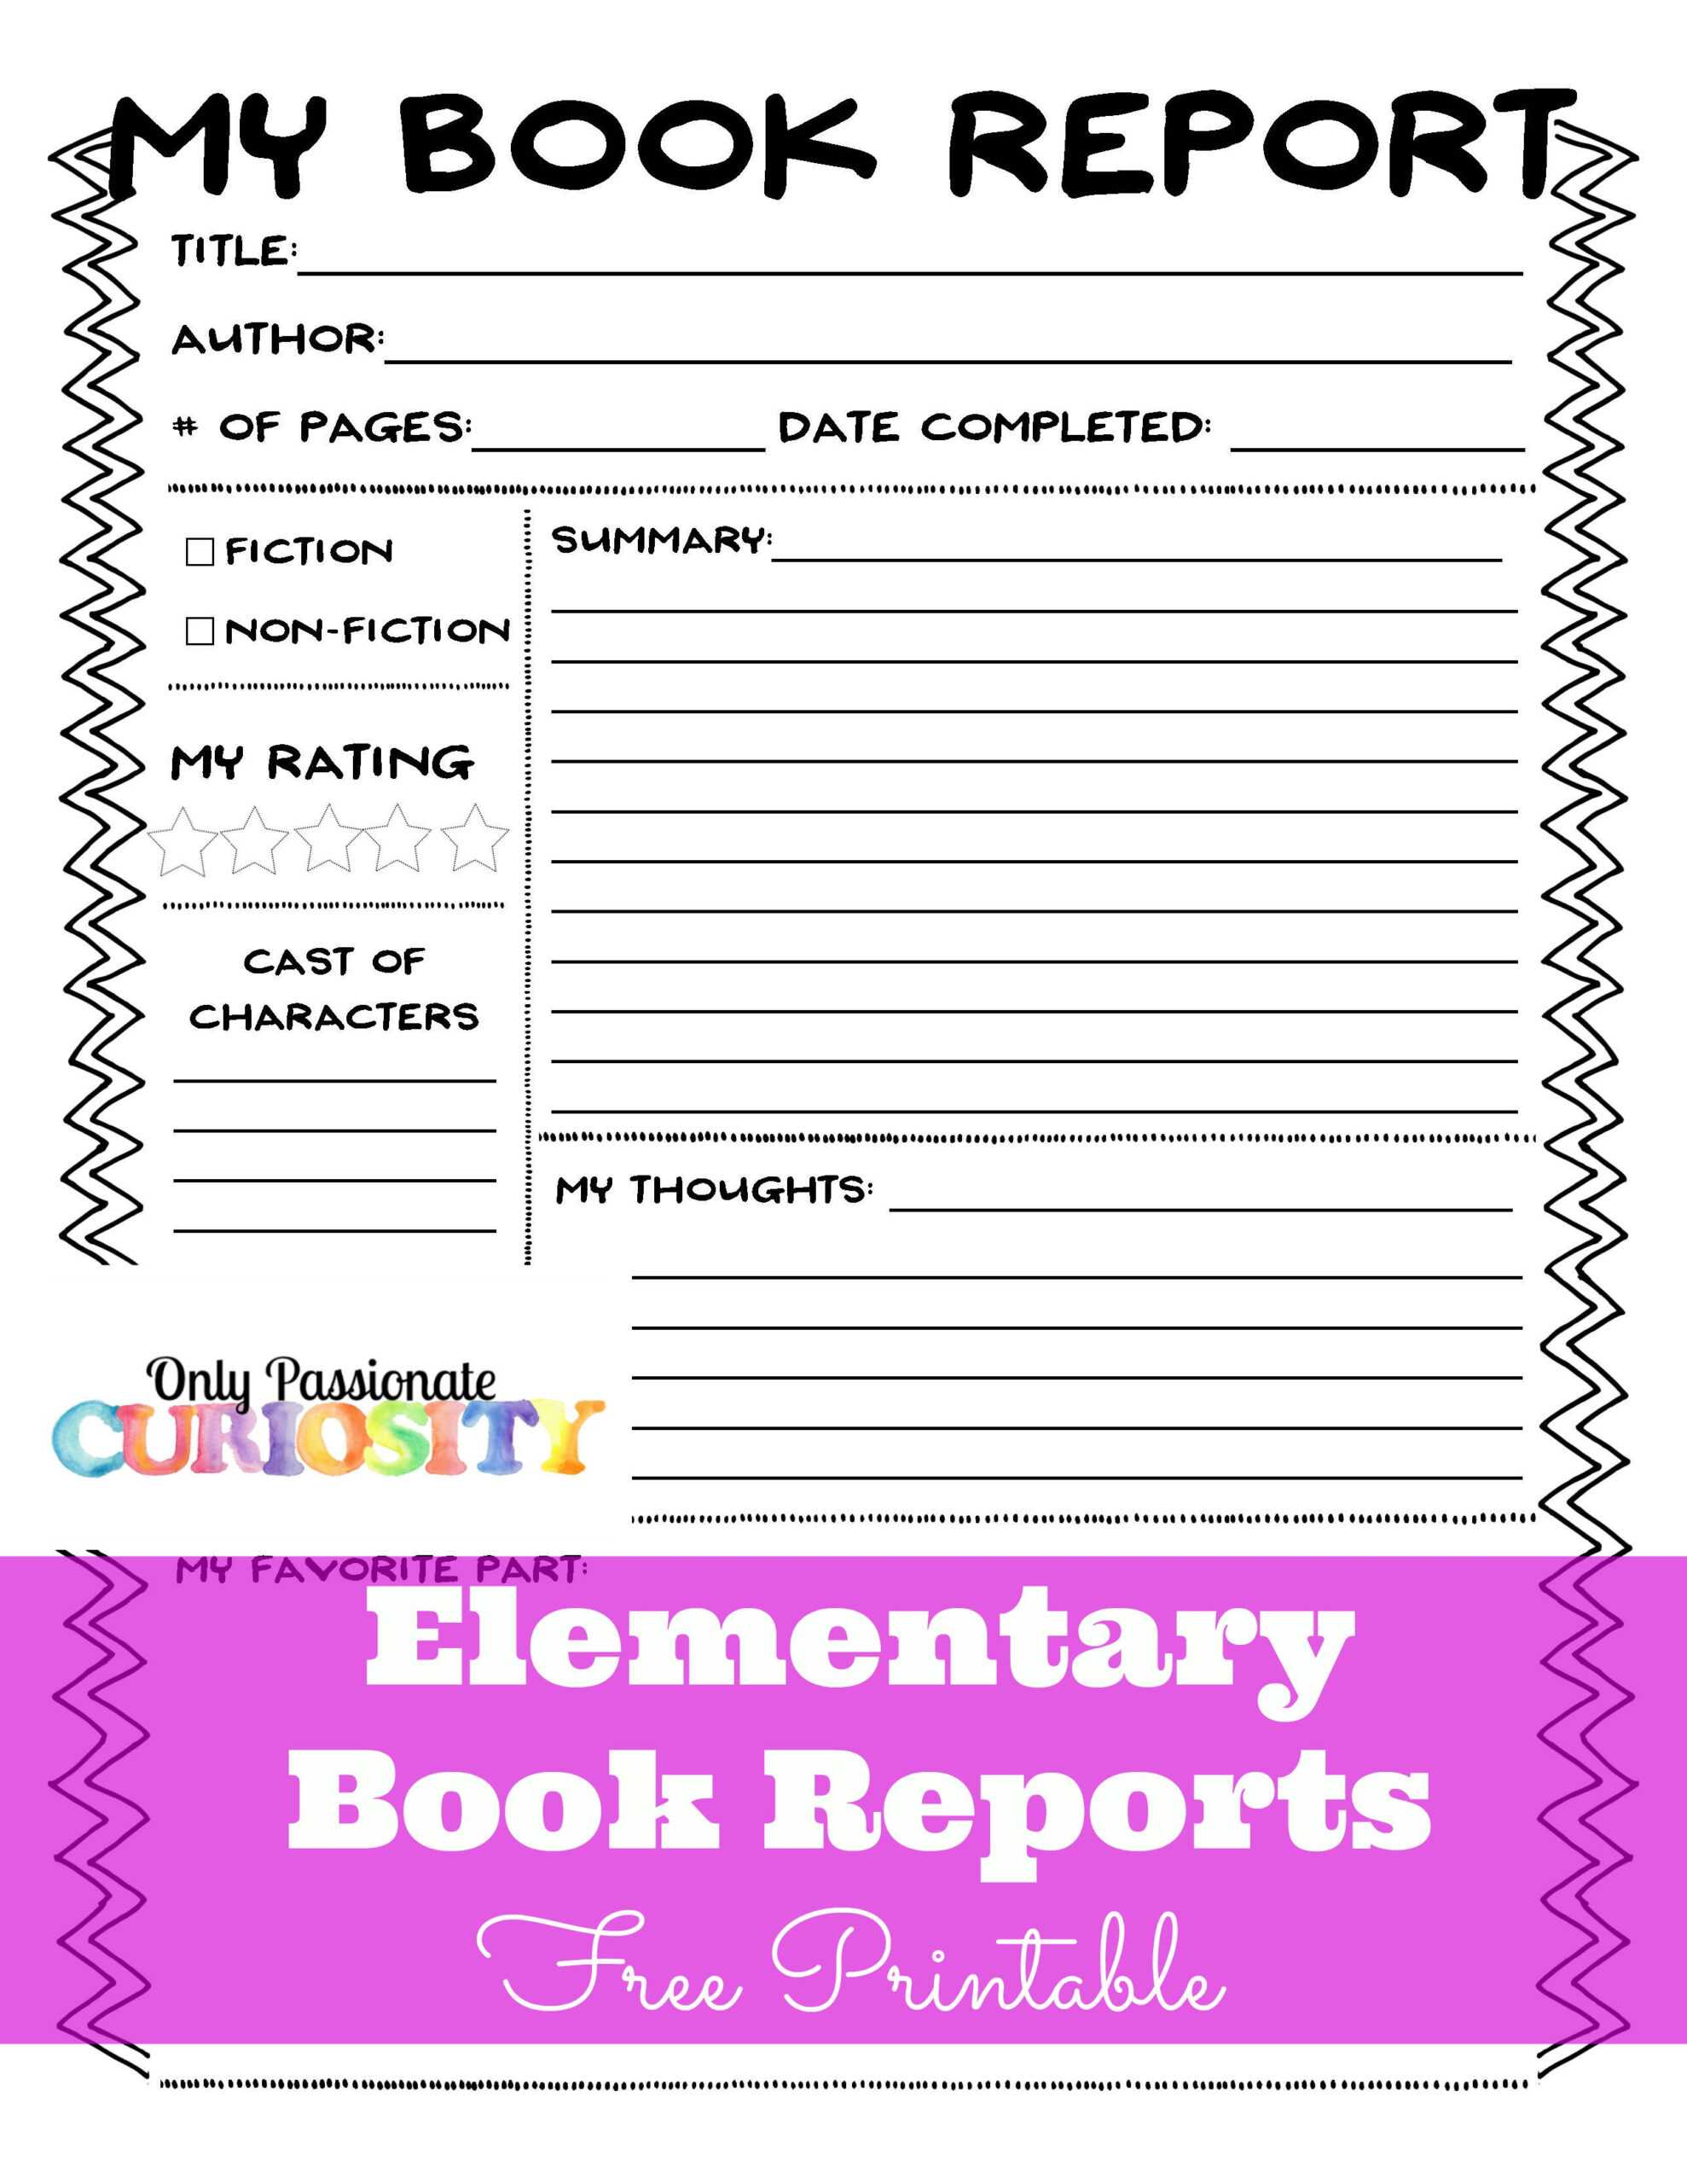 Sandwich Book Report Printout Intended For Sandwich Book Report Printable Template